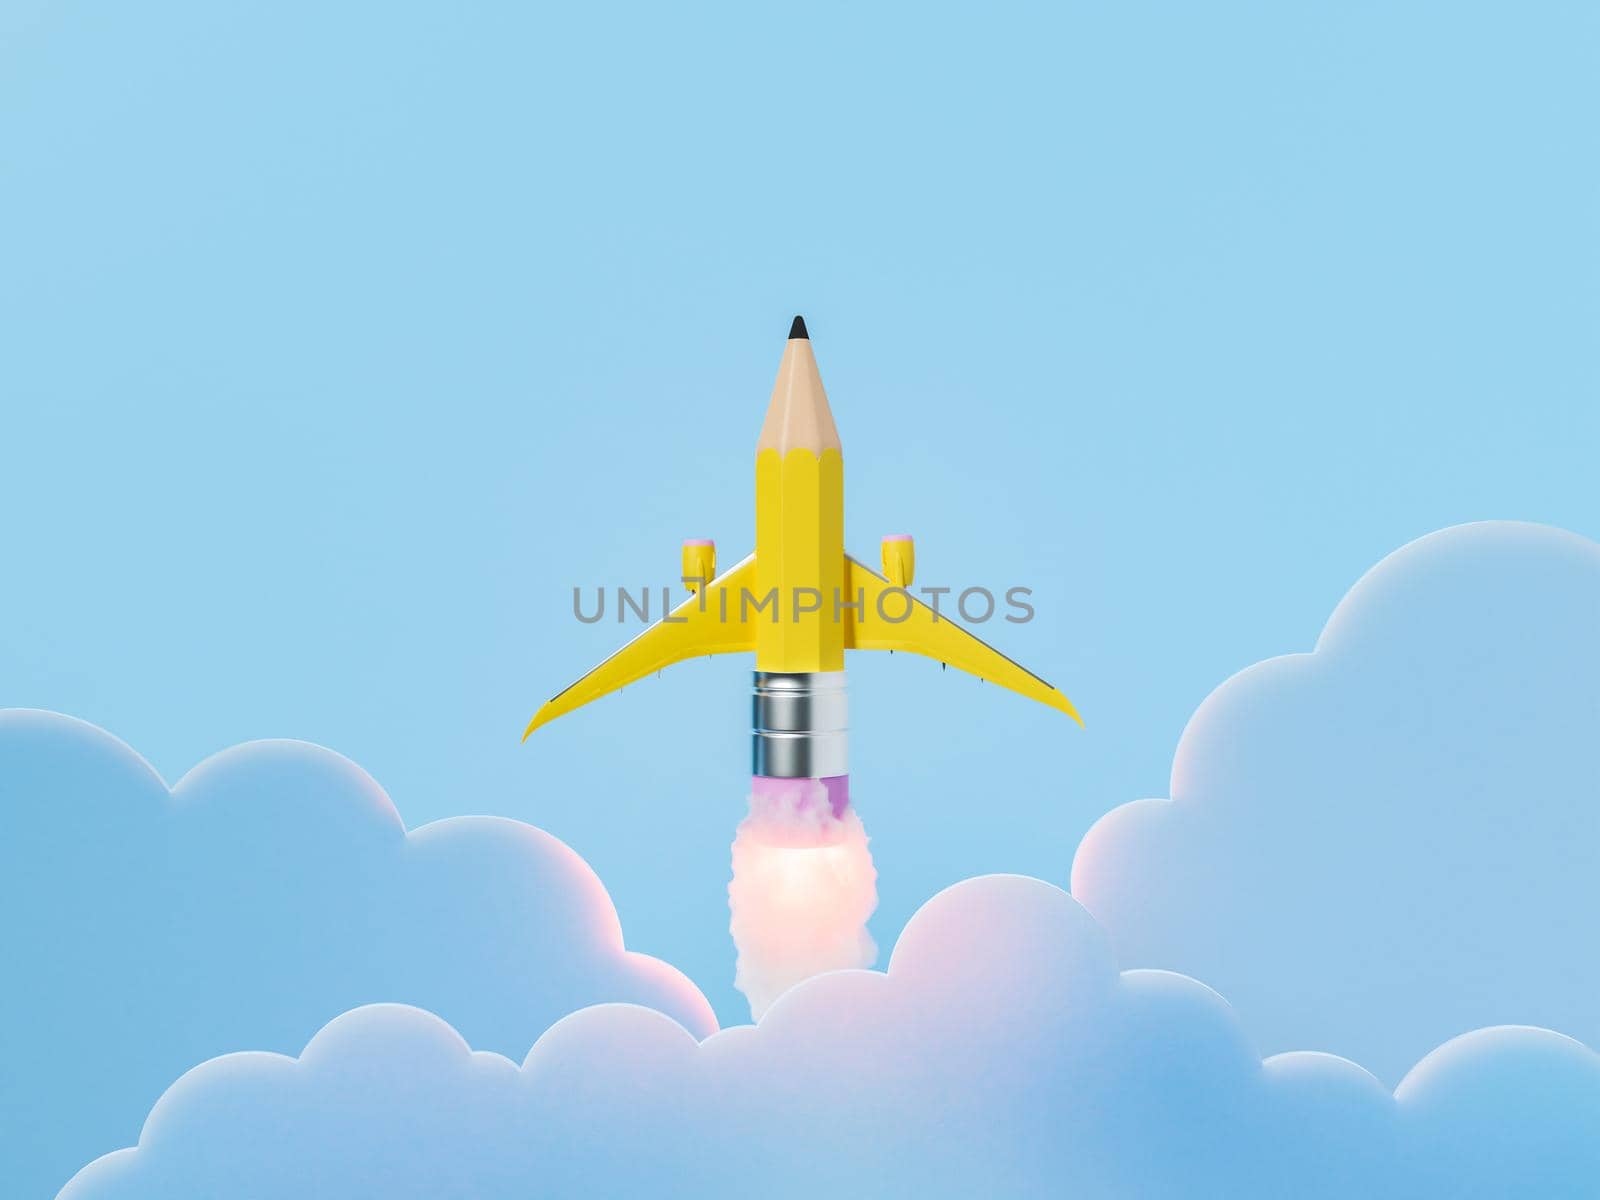 3d illustration representing concept of education and lead pencil in form of flying rocket on blue background